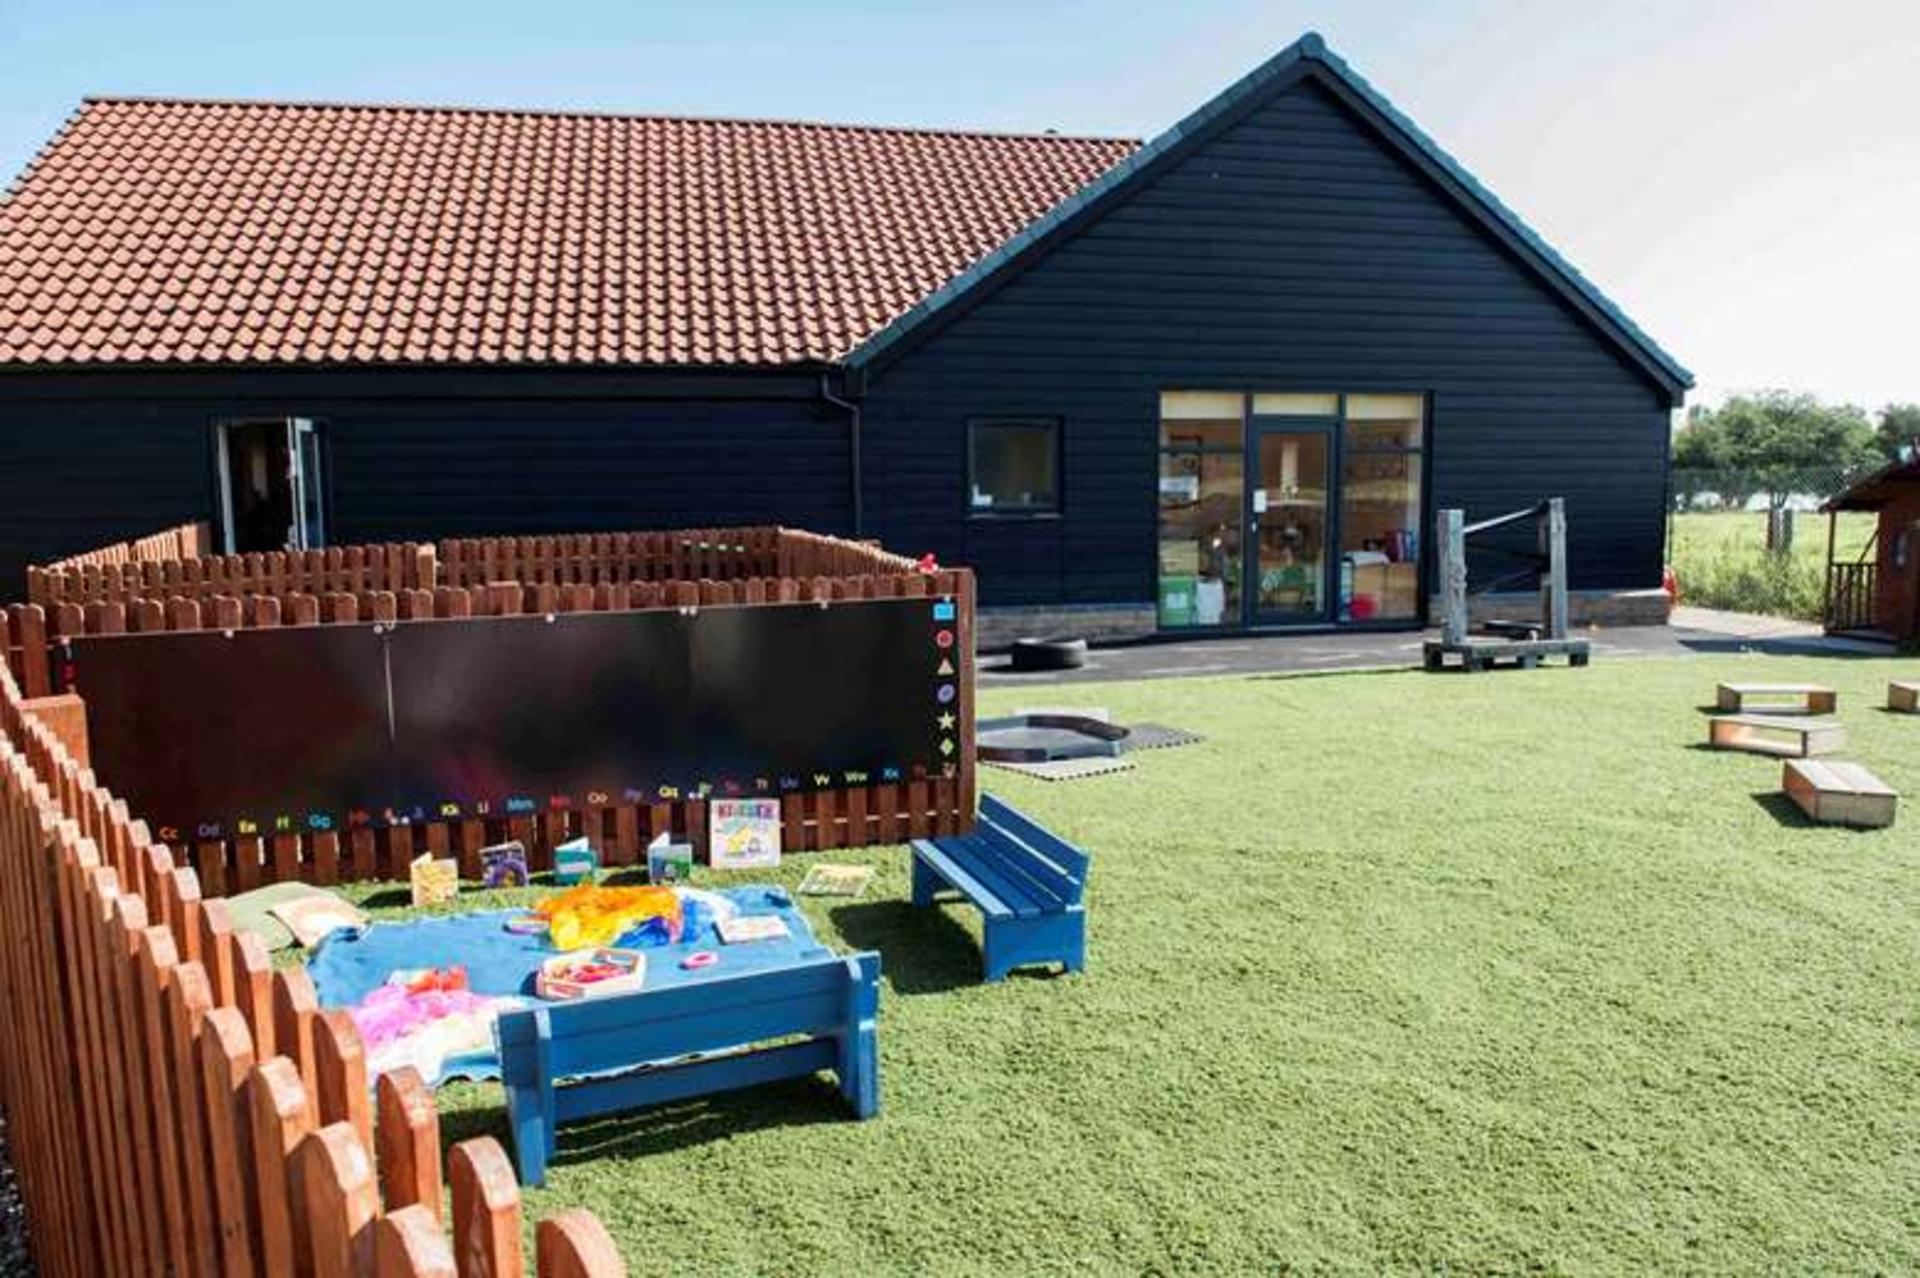 Nursery group acquires three sites as acquisition push gathers pace